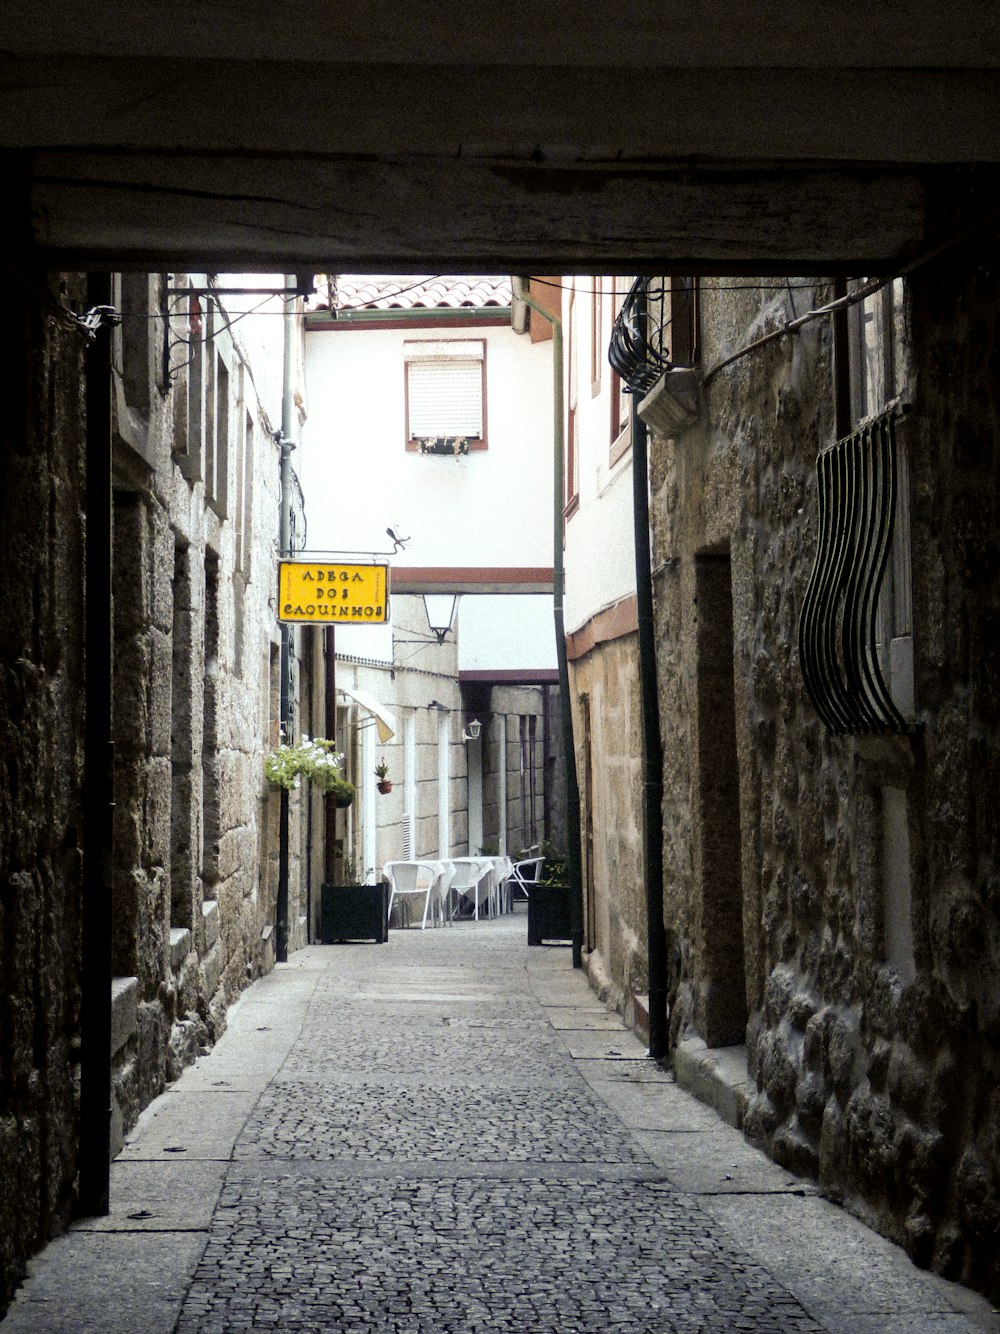 a narrow alley way with a sign